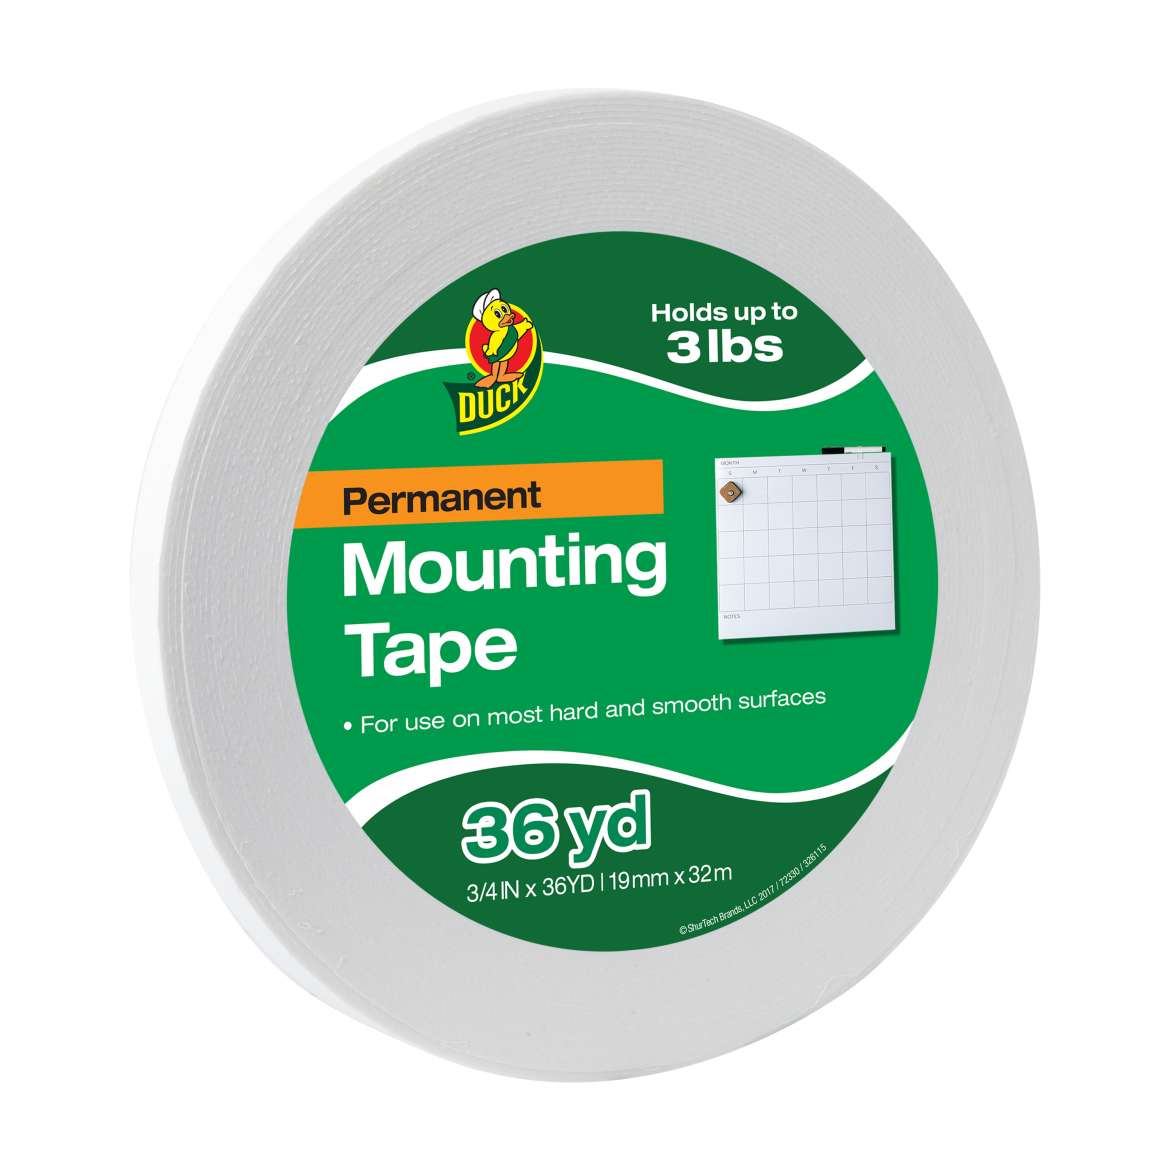 Permanent Mounting Tape